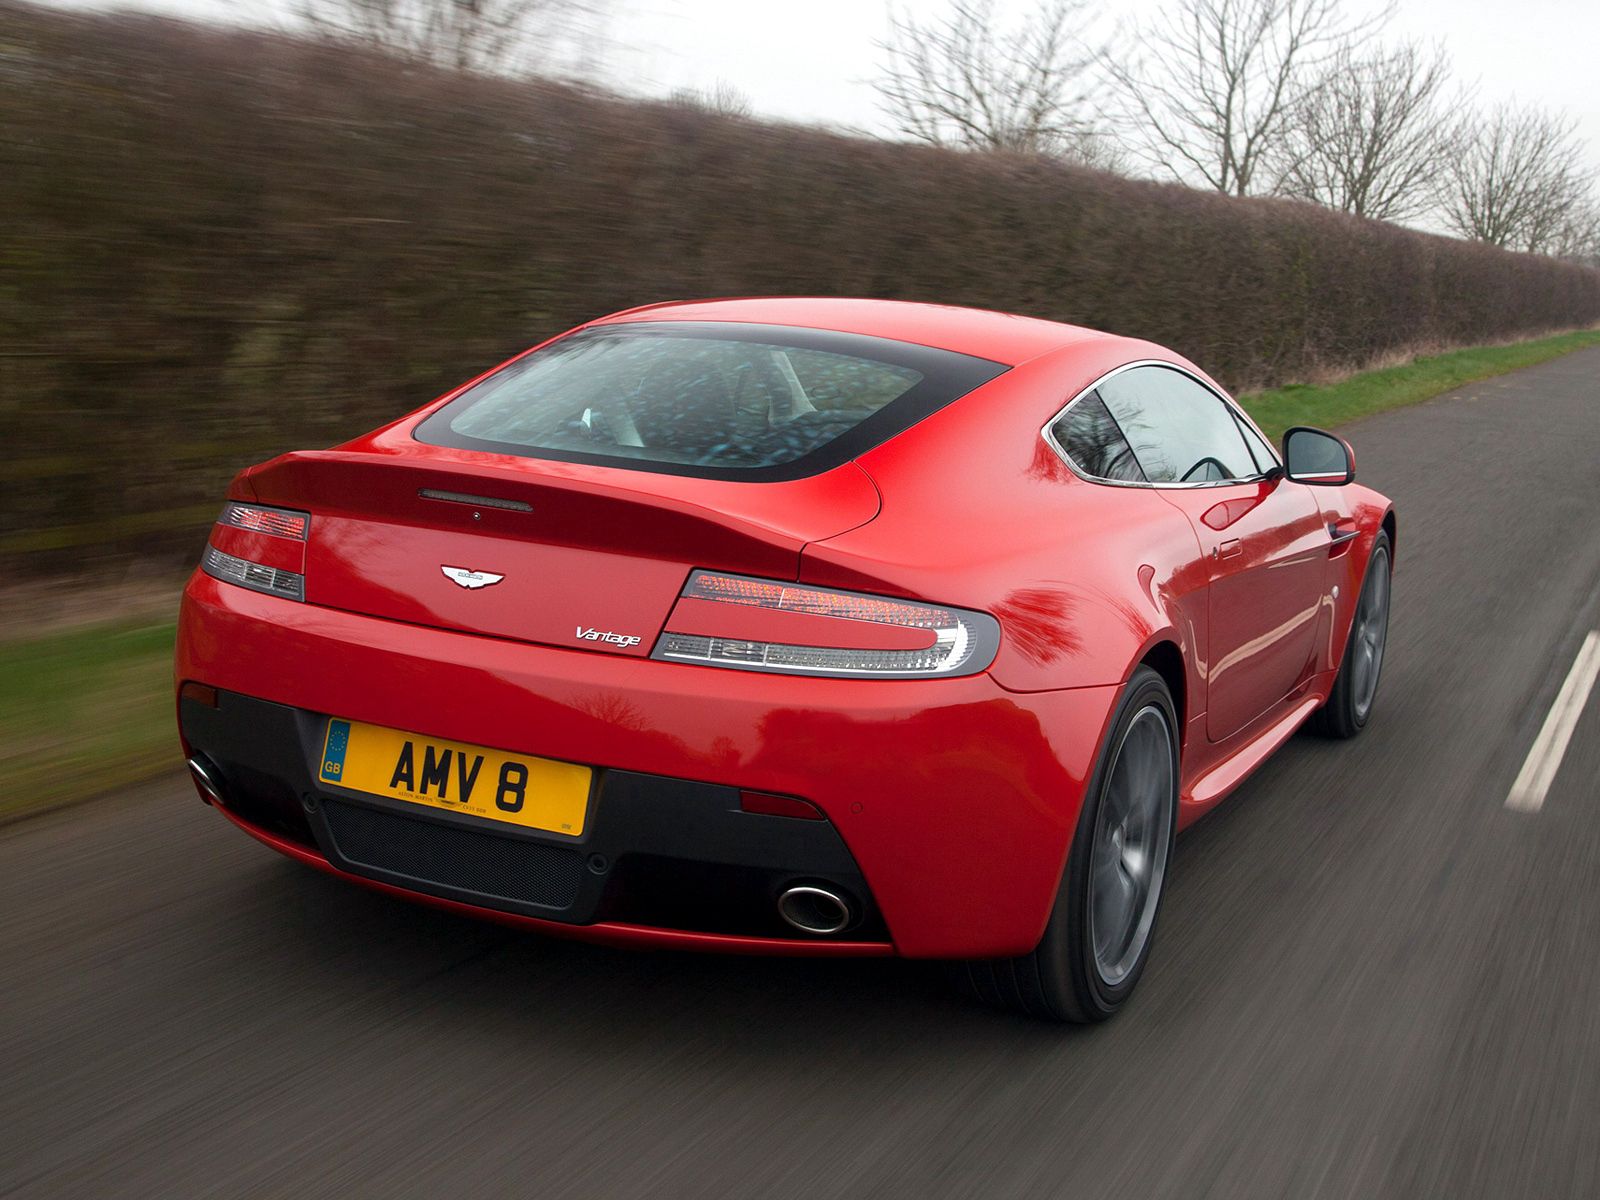 cars, auto, aston martin, red, back view, rear view, speed, v8, vantage, 2012